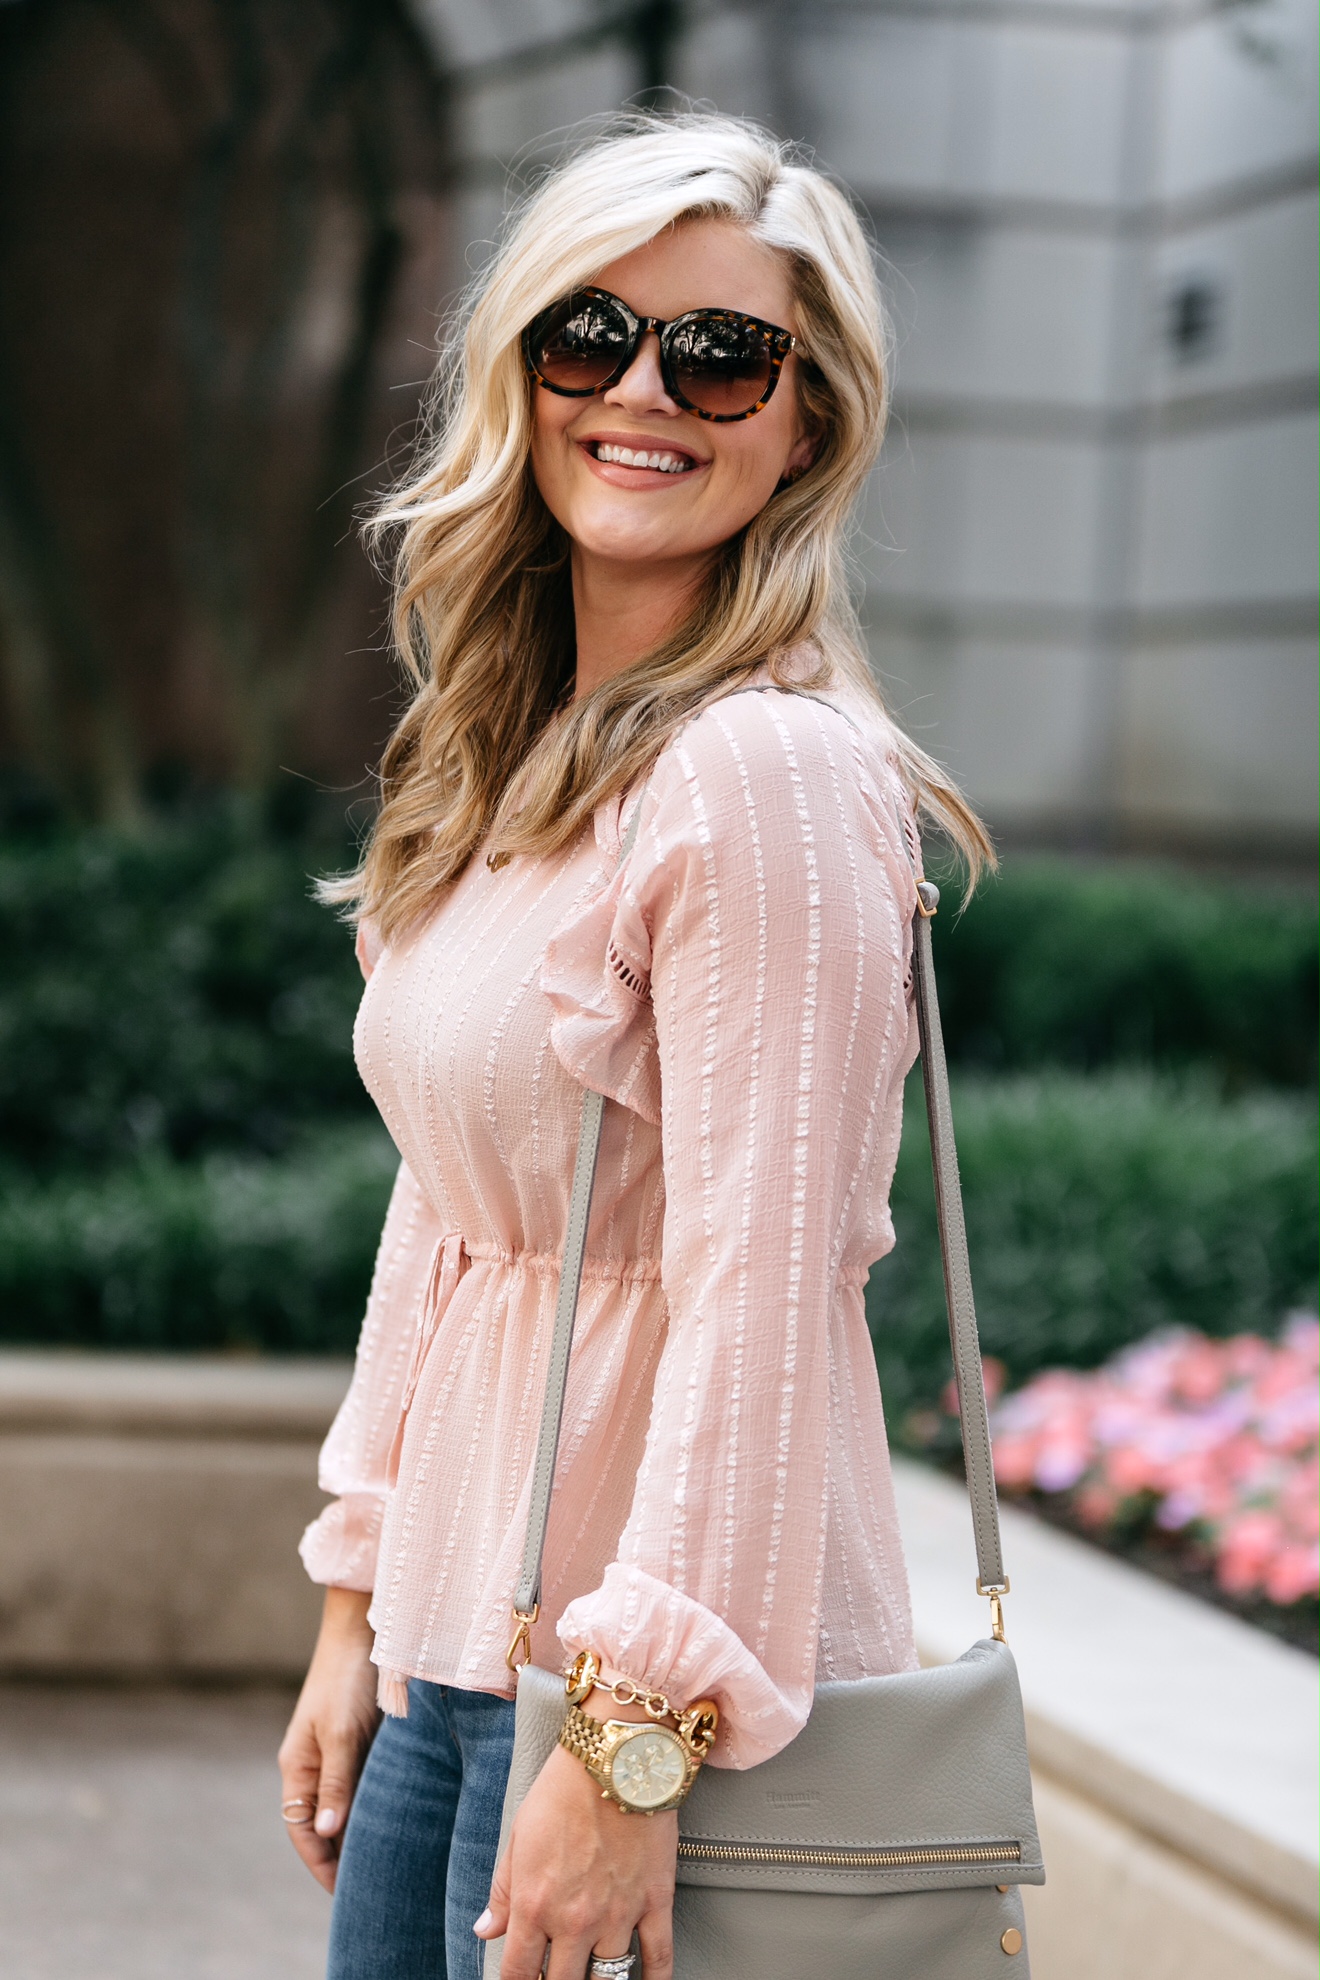 Cristin Cooper, The Southern Style Guide, Pink Ruffle Top & Grey Bag, Summer Date Night Outfit